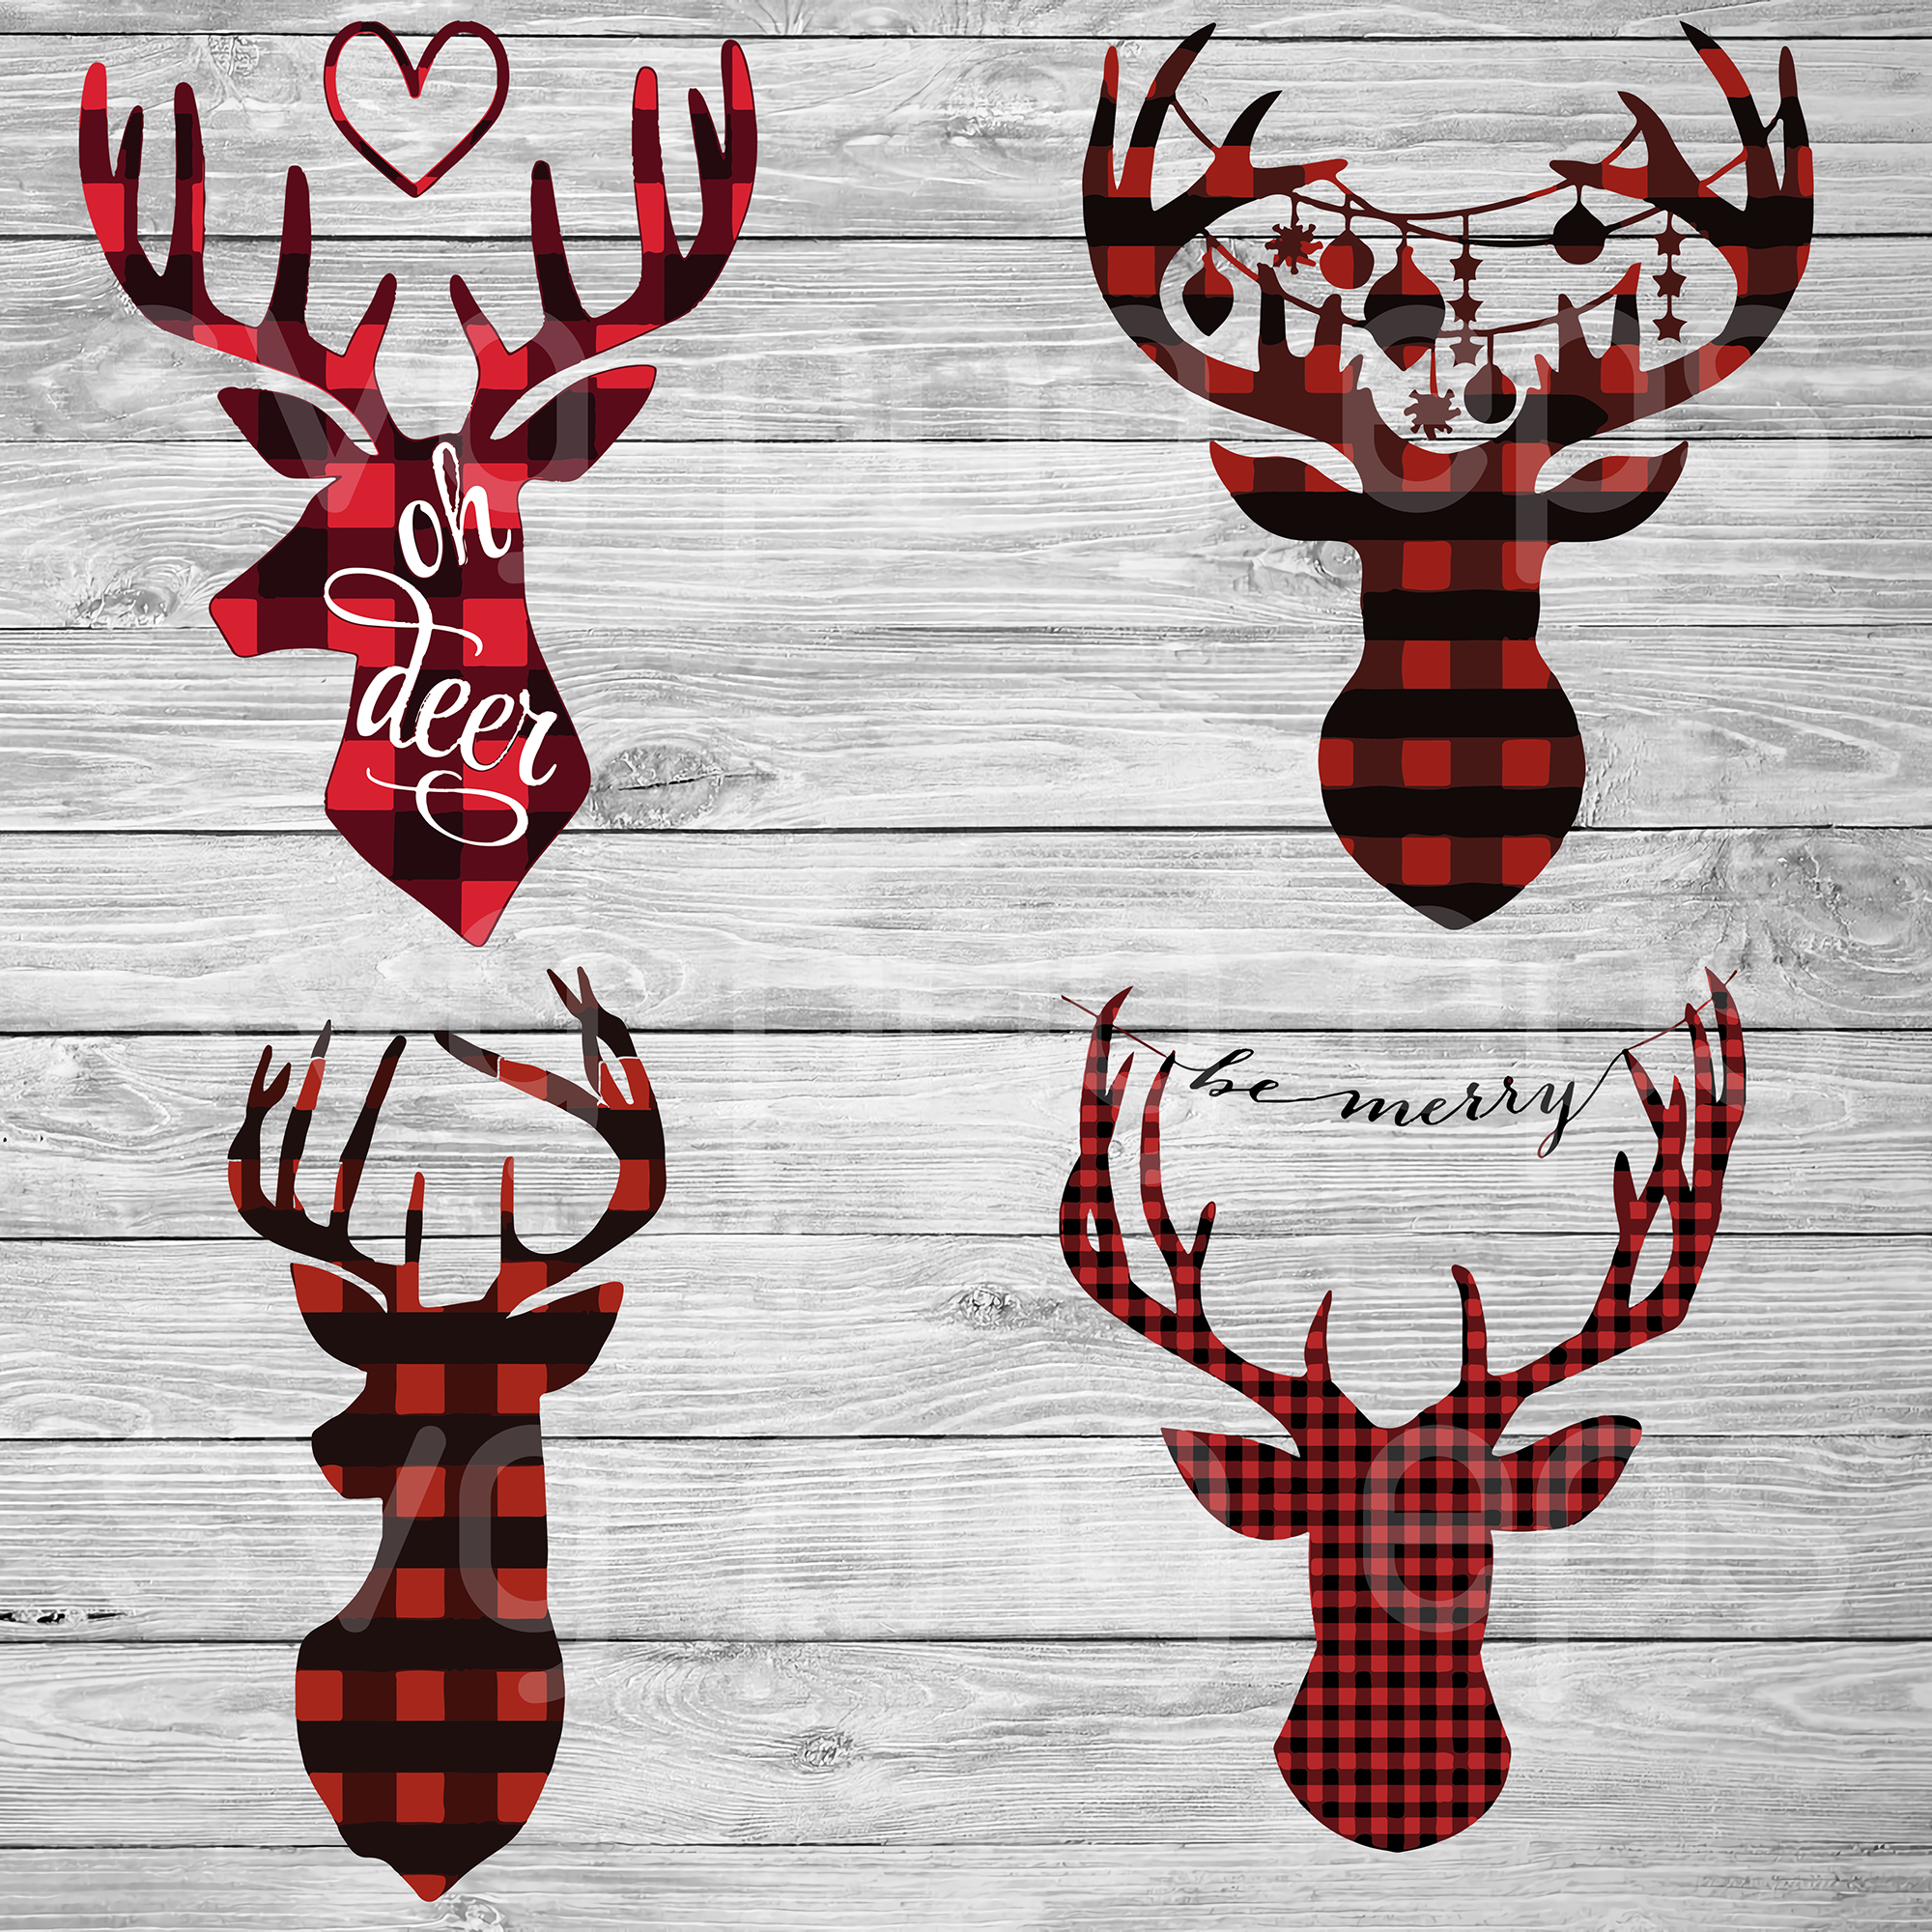 Download Reindeer Svg Christmas Pattern Cutting Files For Cricut Svg Dxf Ep Beetanosvg Scalable Vector Graphics